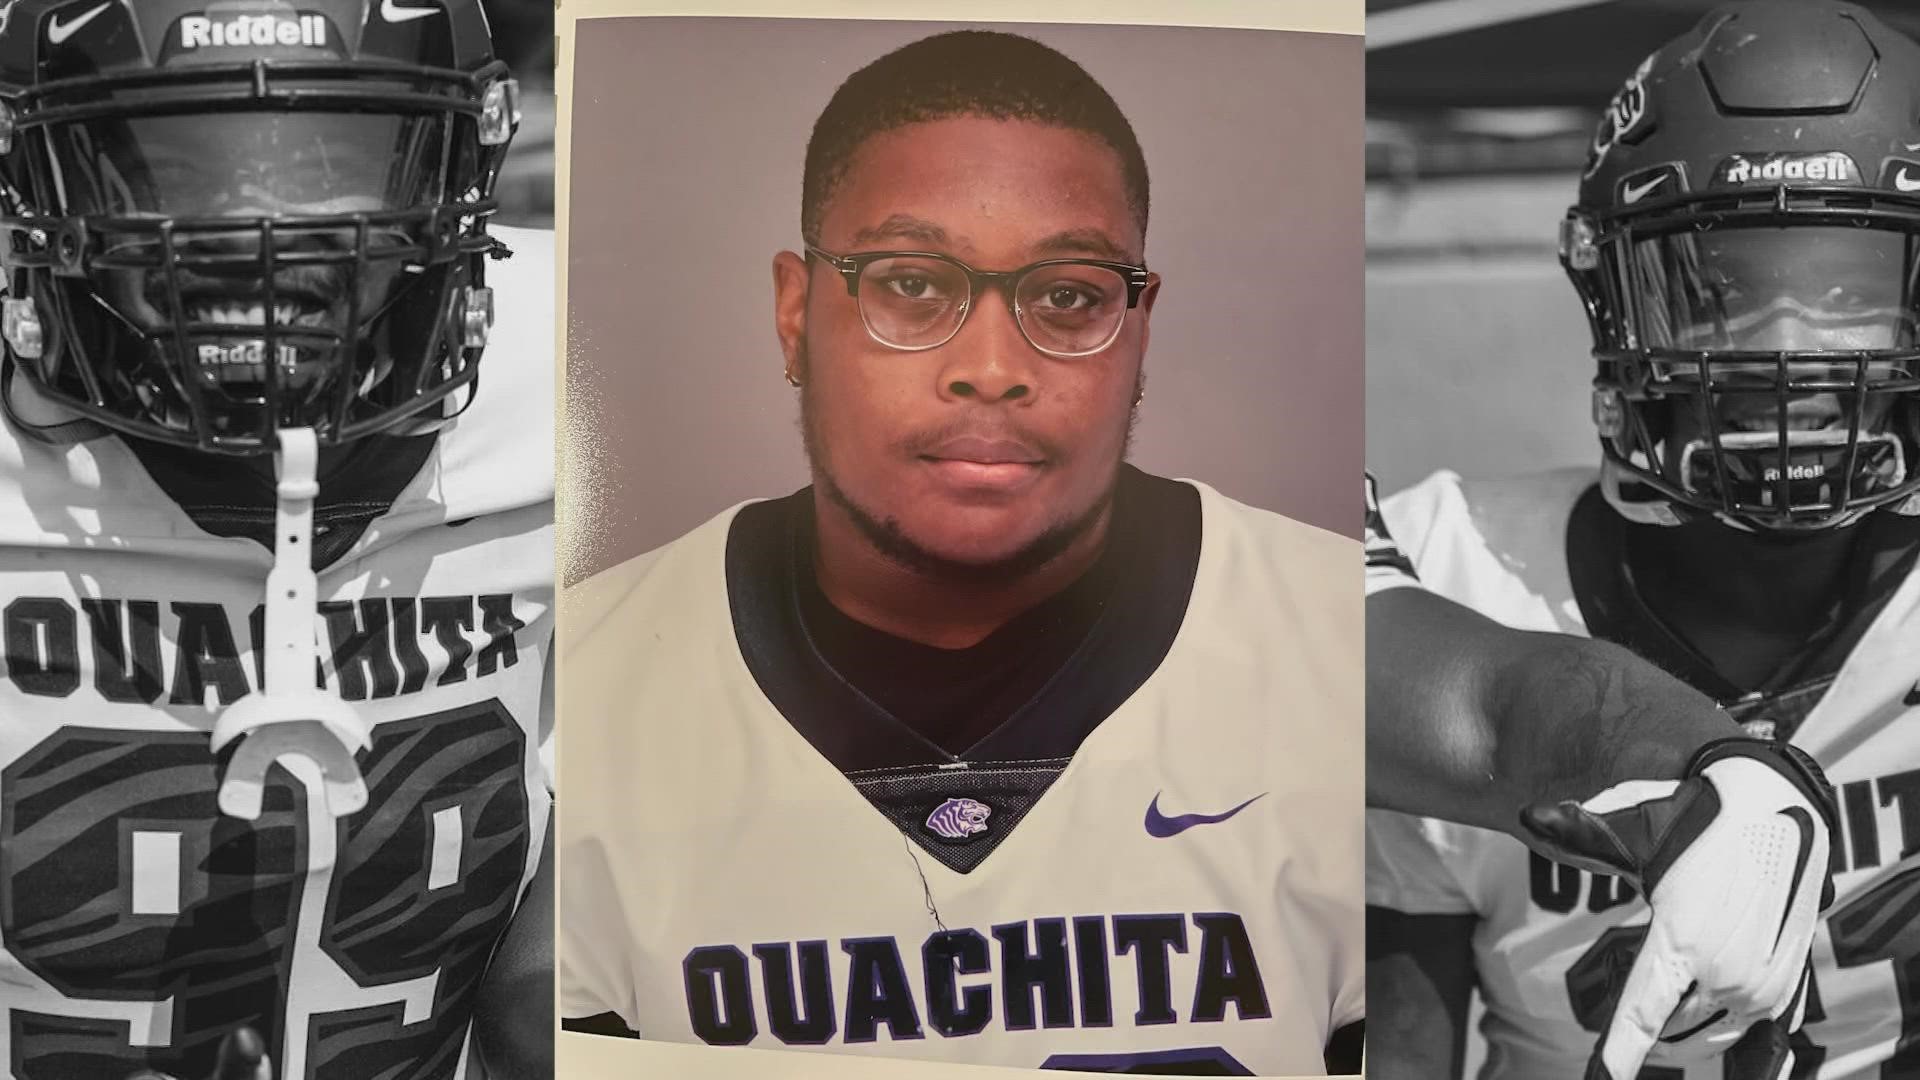 Ouachita Baptist University (OBU) in Arkansas announced the death of defensive lineman Clark Yarbrough after a sudden collapse.